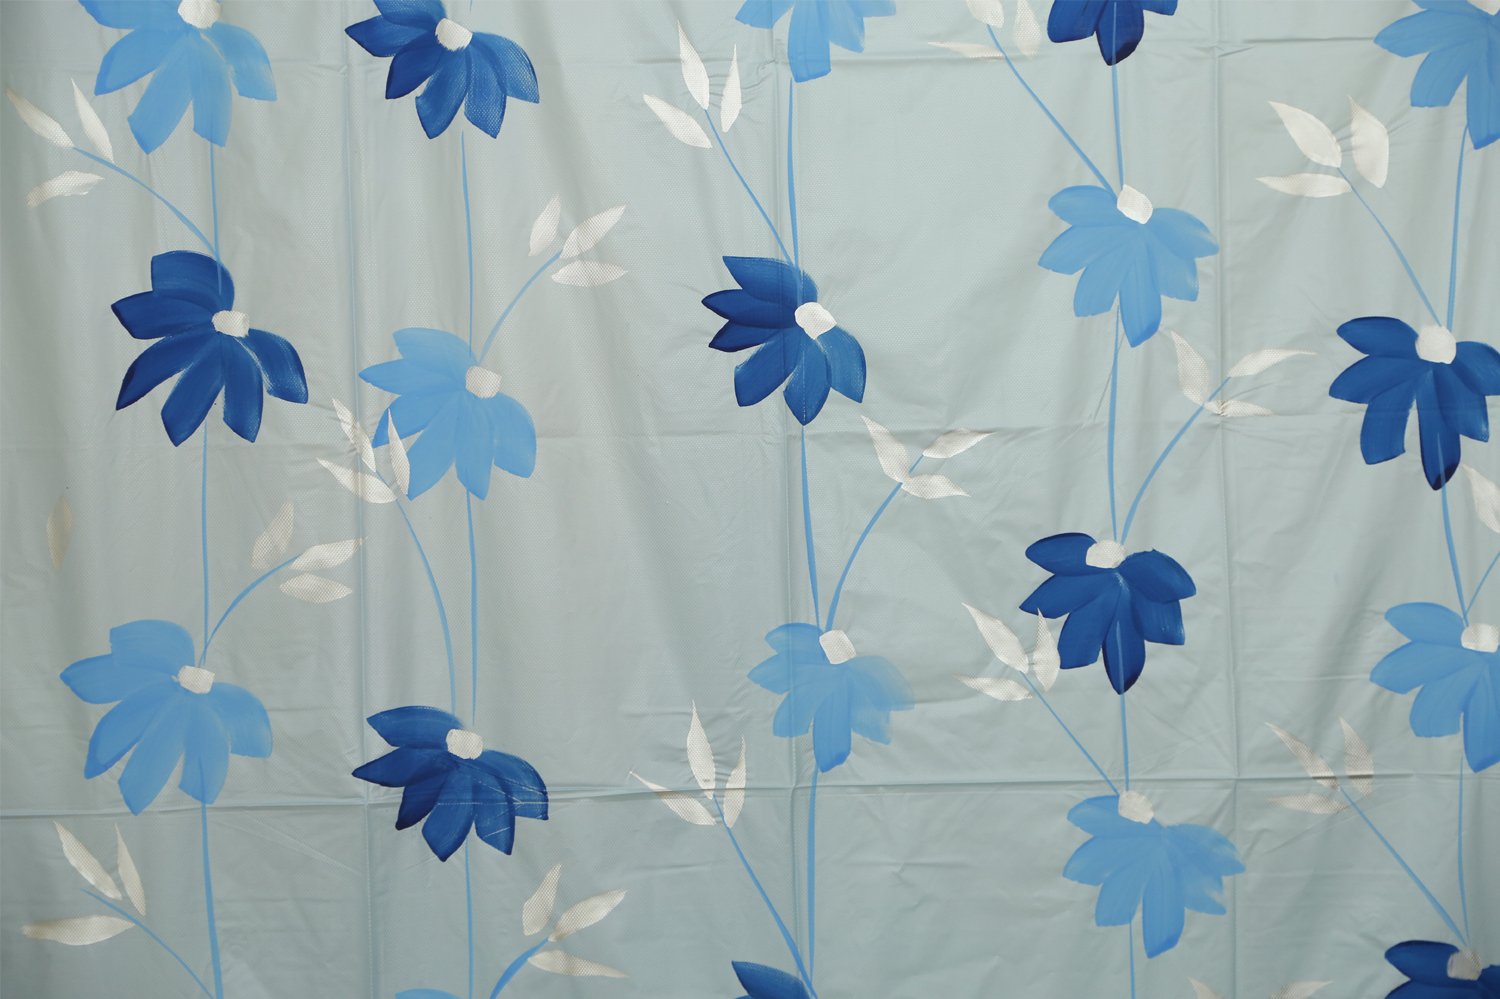 Kuber Industries PVC Floral Shower Curtain, 7ft, Sky Blue